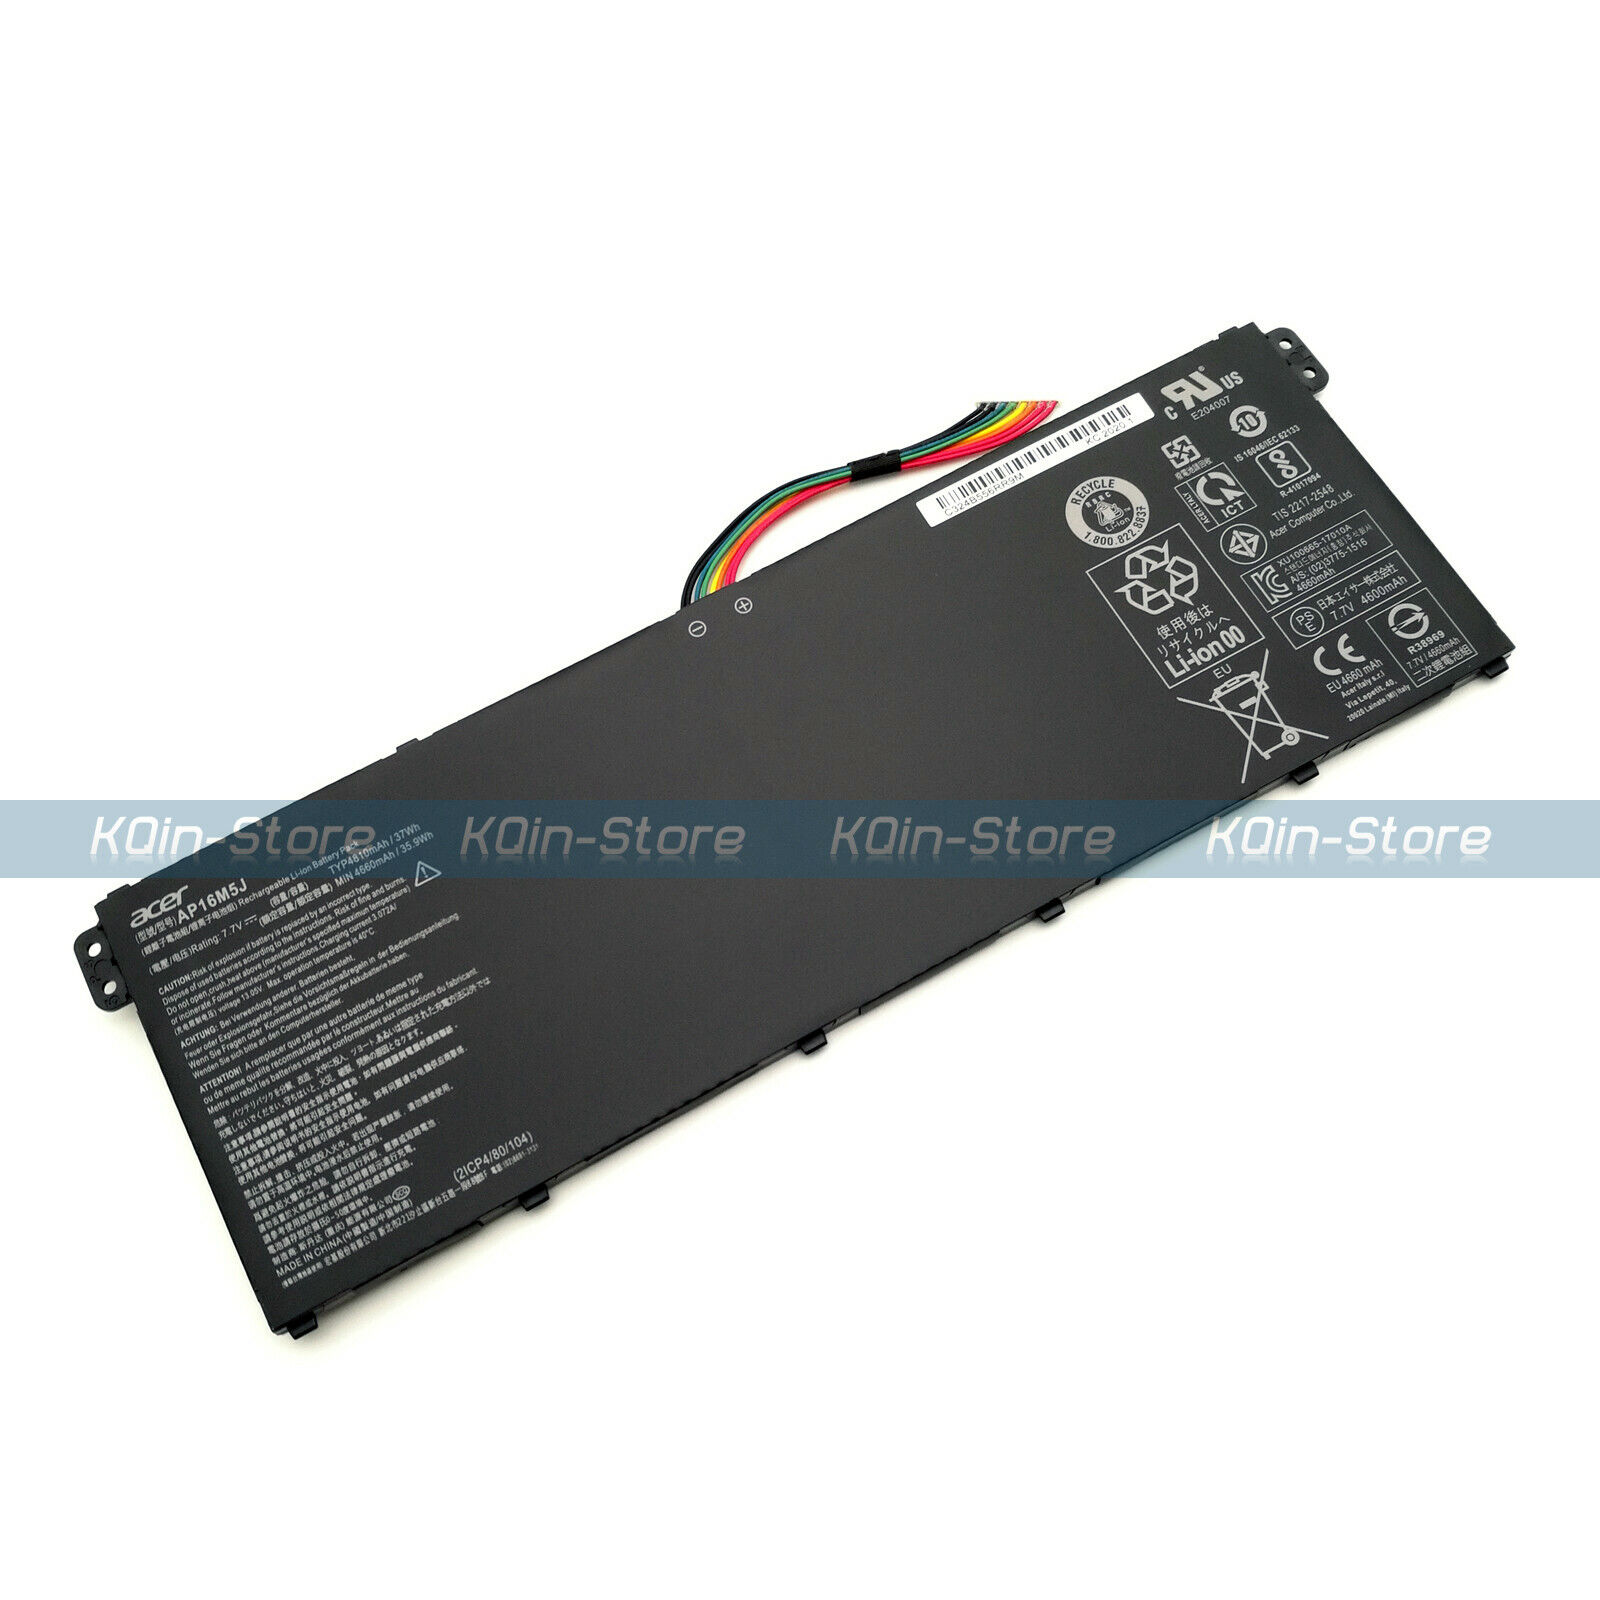 Genuine AP16M5J 37Wh Battery for Acer Aspire 3 A314-31 A315-21 A315-51 5 A515-51